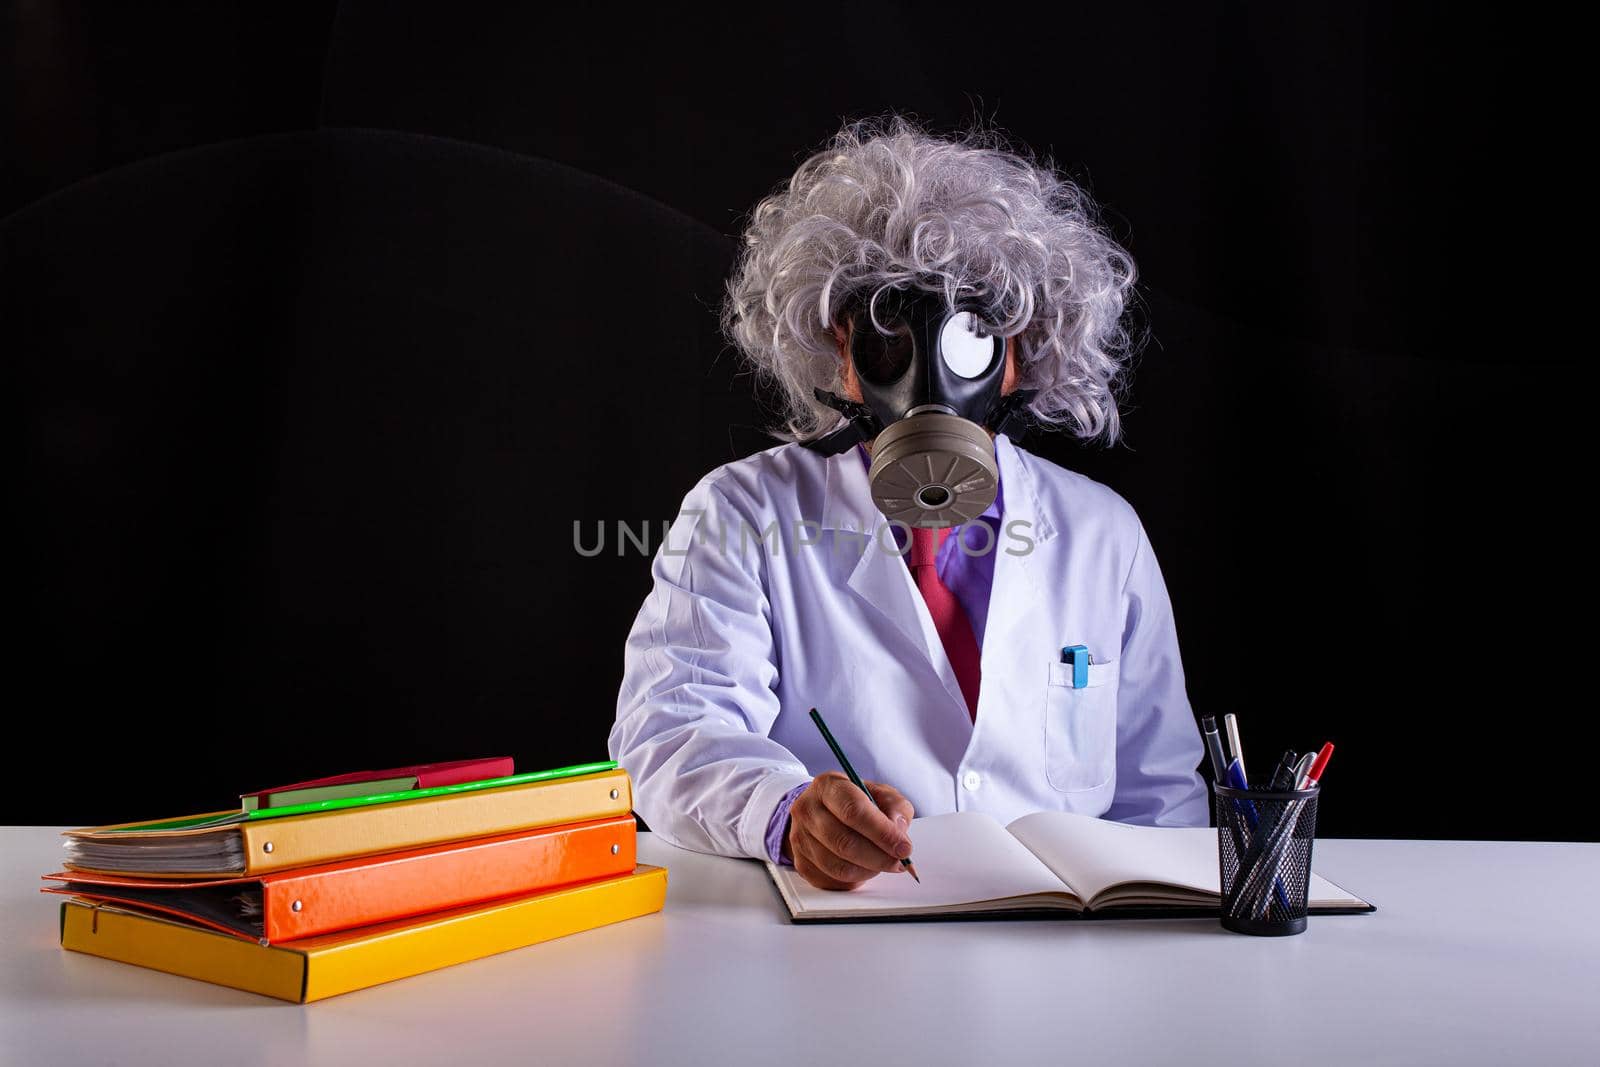 Crazy science teacher in white coat with unkempt hair sitting at the desk wears a gas mask by bepsimage